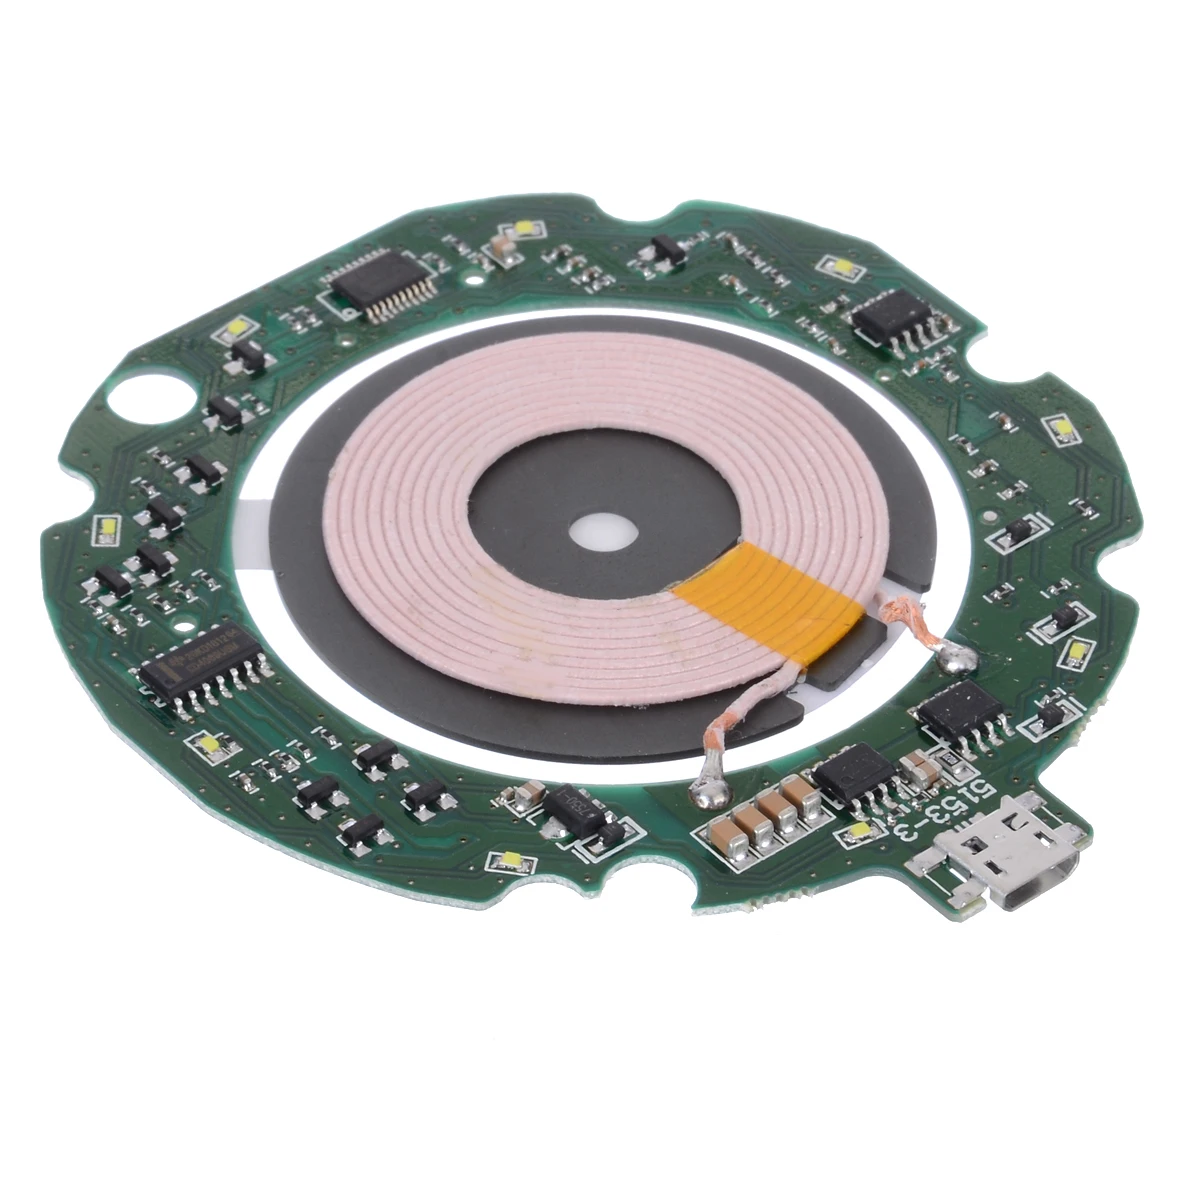 High Quality Standard 10W Qi Fast Wireless Charger Module Transmitter PCBA Circuit Board + Coil DIY Charging